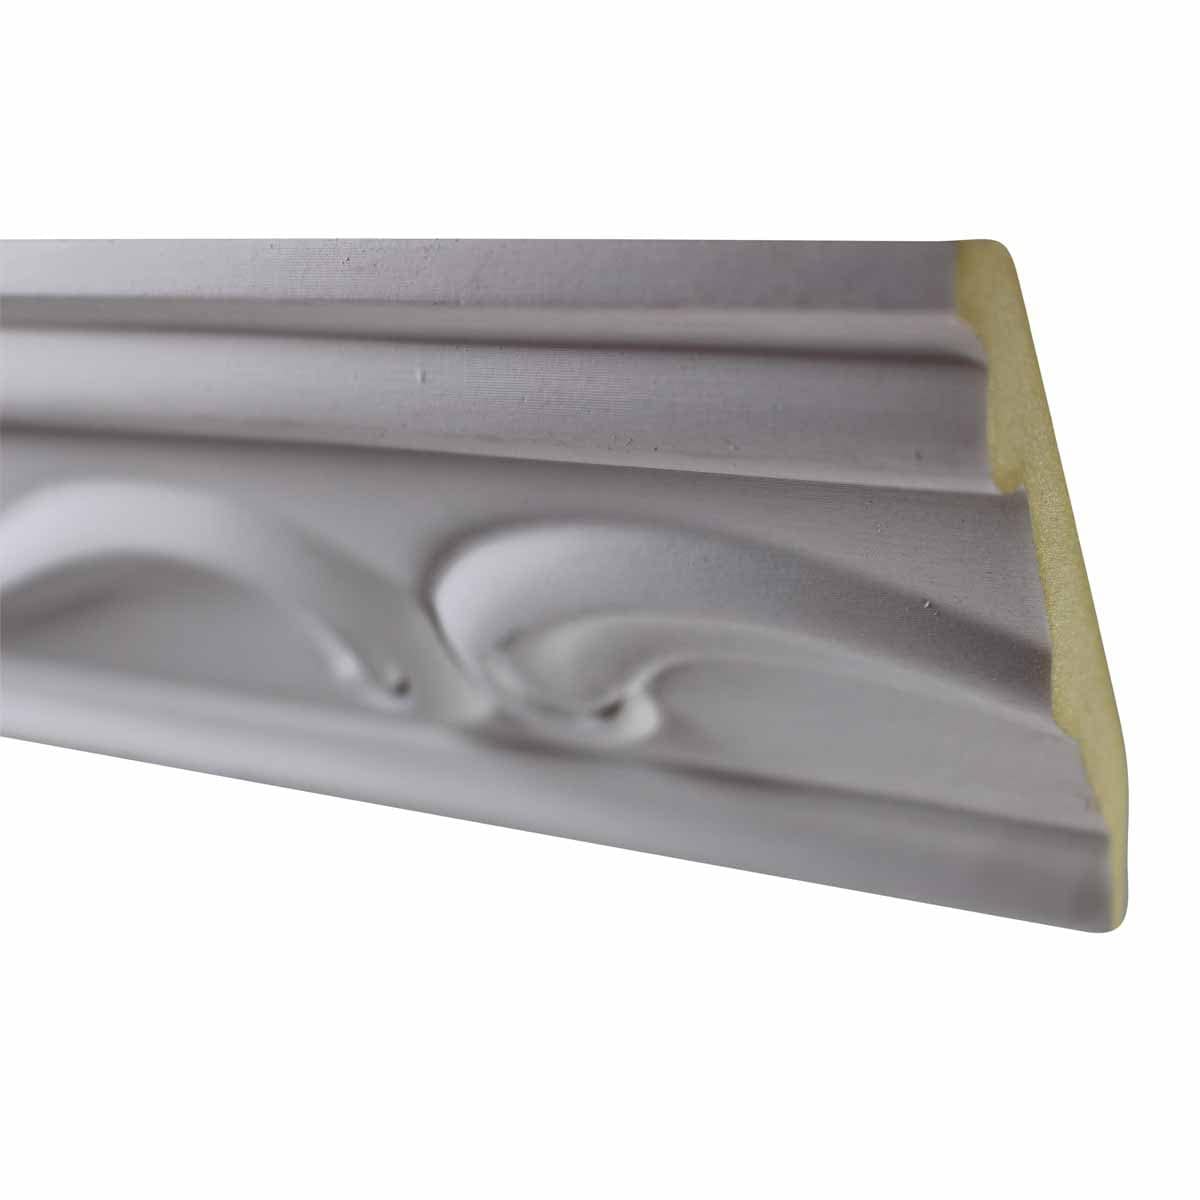 https://ak1.ostkcdn.com/images/products/is/images/direct/0fd1a9442c65a8d7e9f0ef770258fd05e2470d8c/Cornice-White-Urethane-Sample-of-10512-19.75%22-Long-%7C-Renovator%27s-Supply.jpg